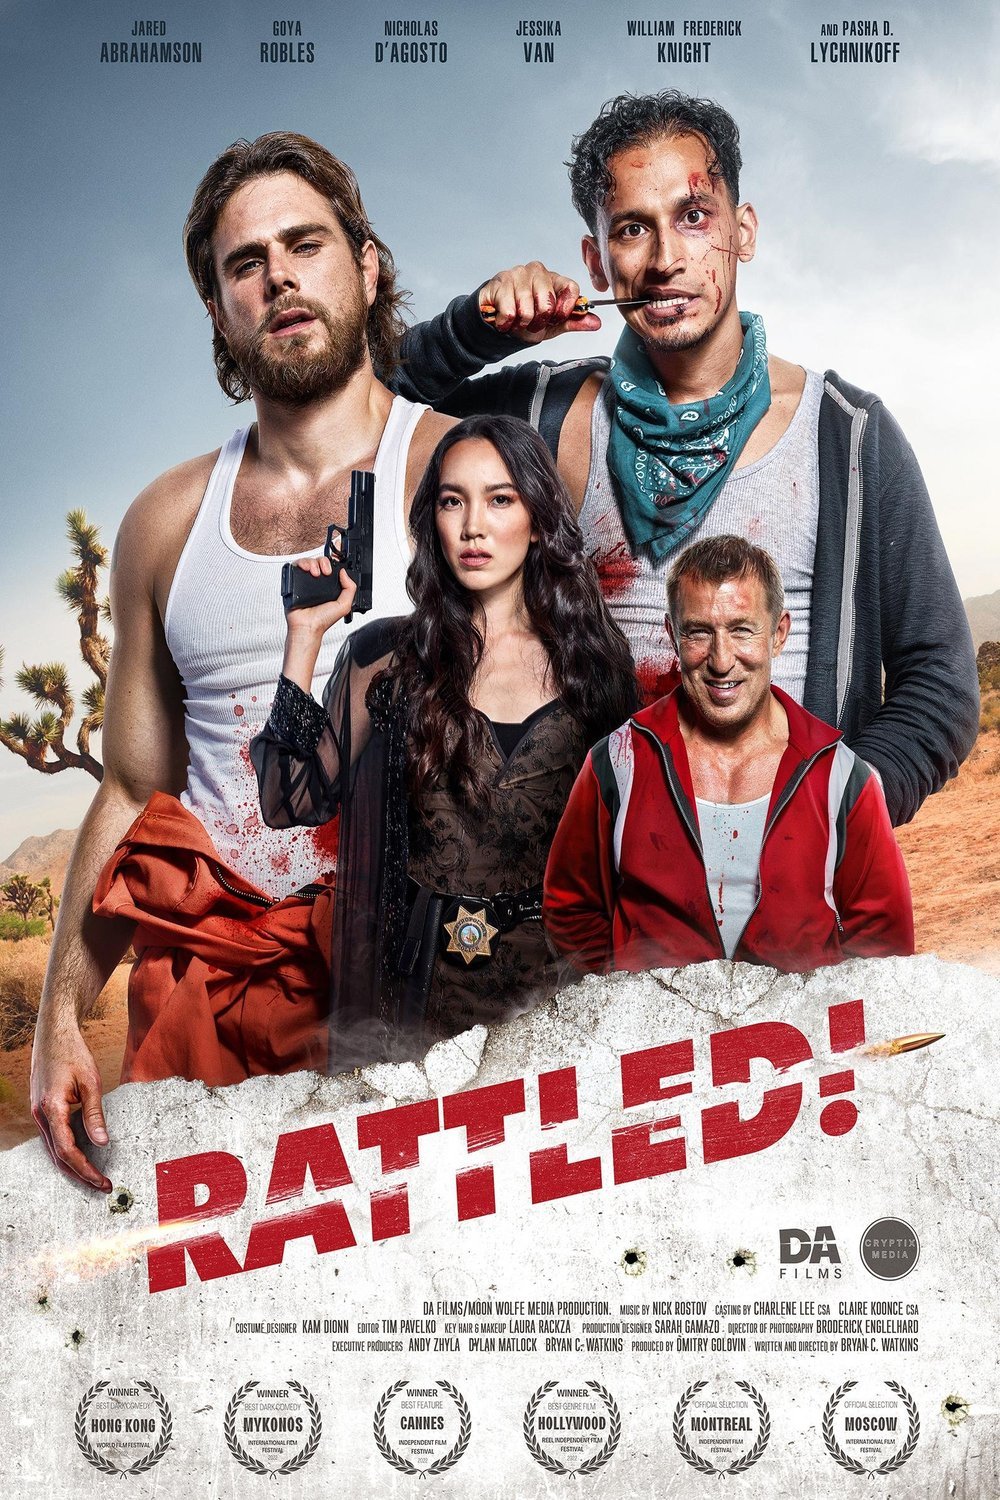 Poster of the movie Rattled!